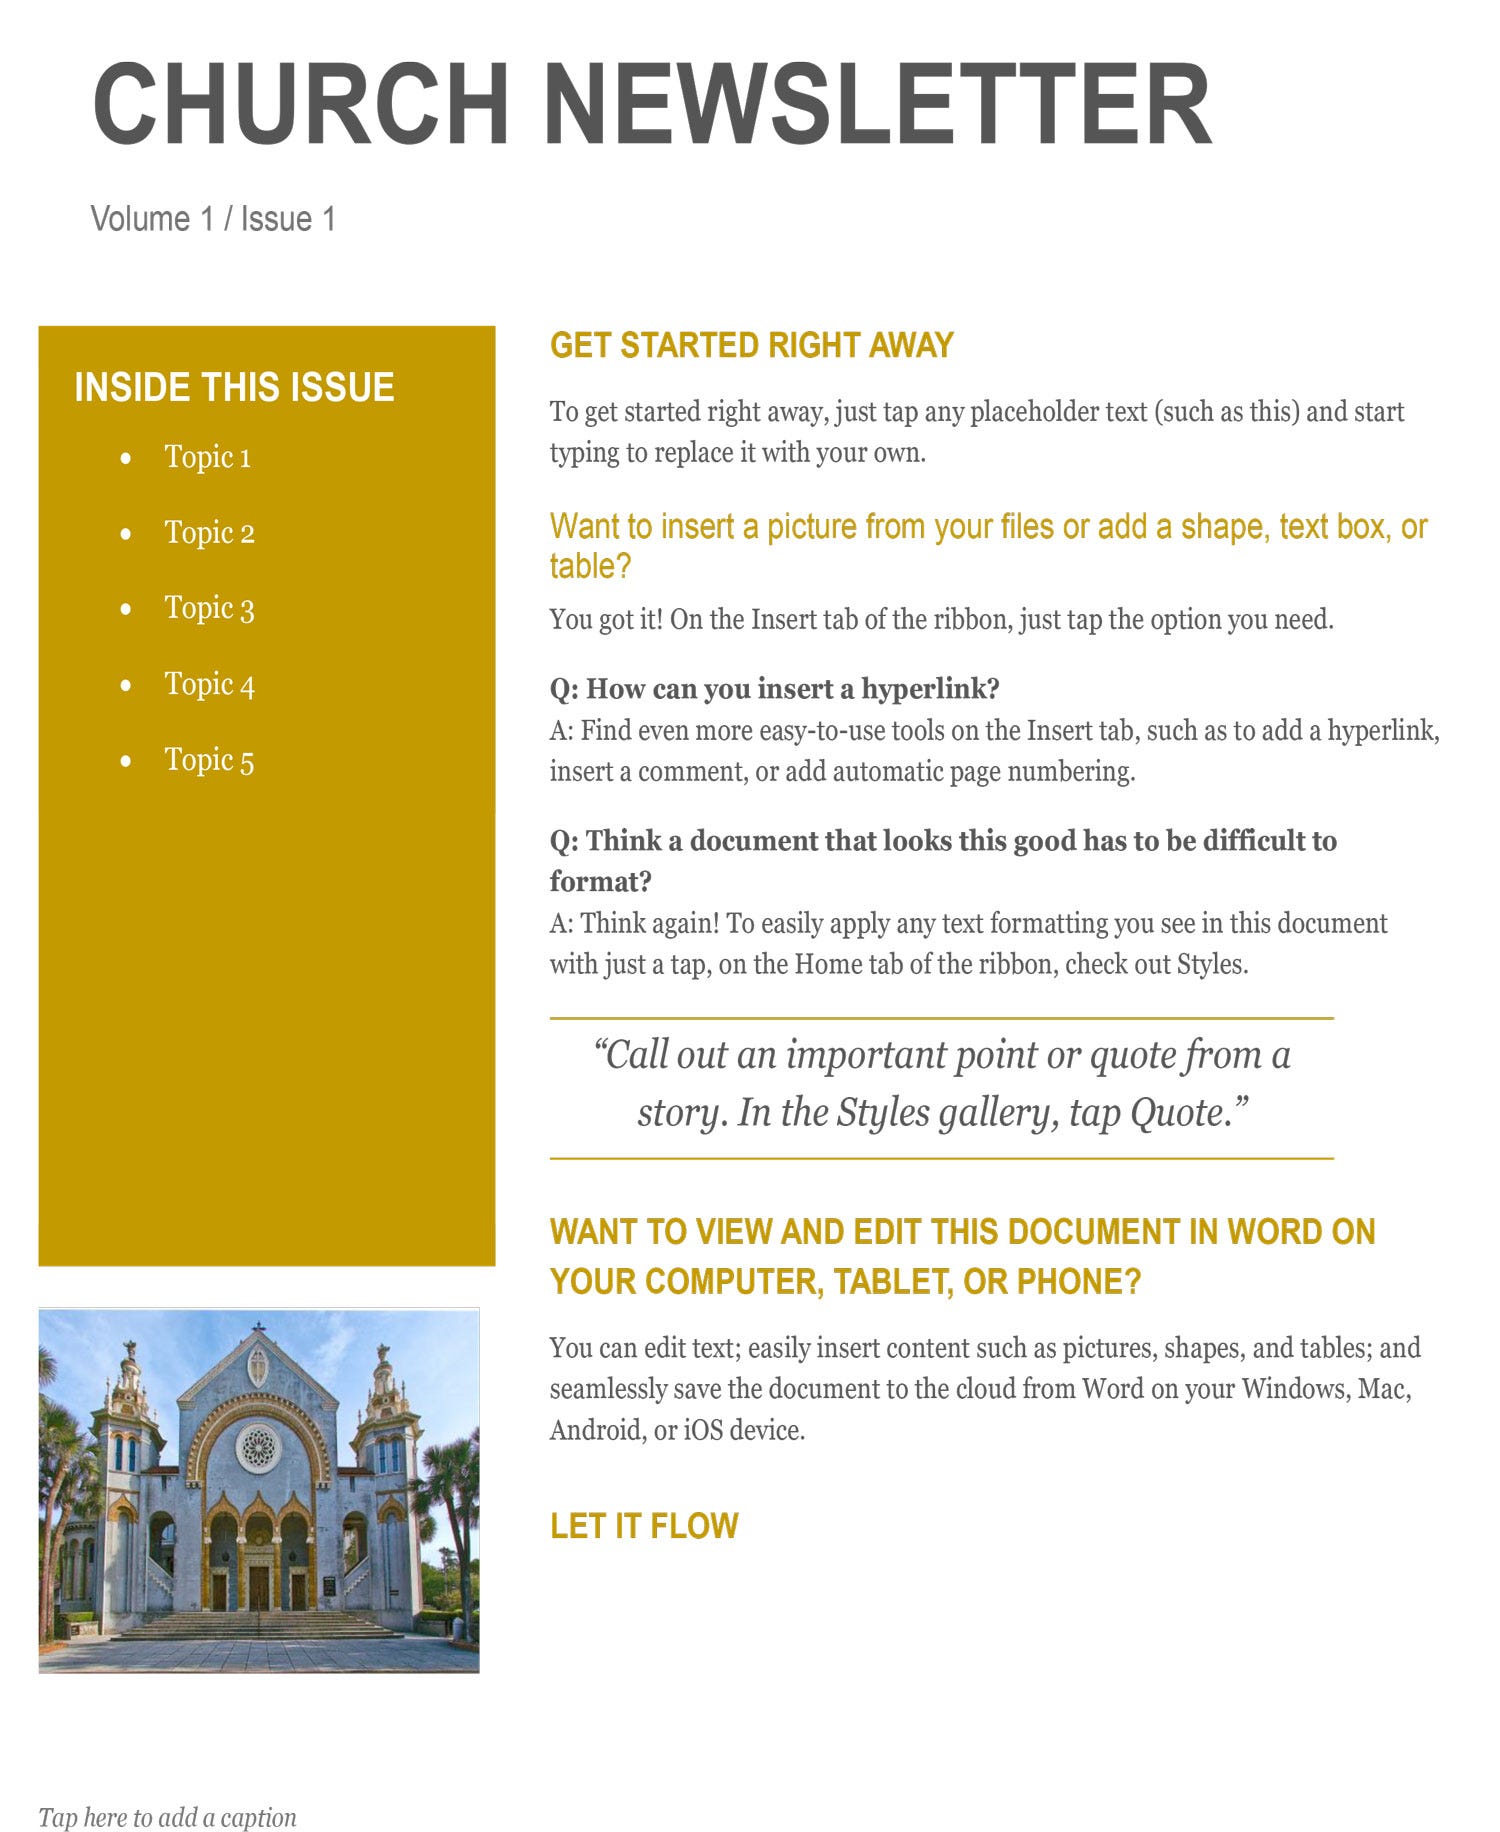 10-free-church-newsletter-templates-you-can-use-now-by-get-a-newsletter-medium